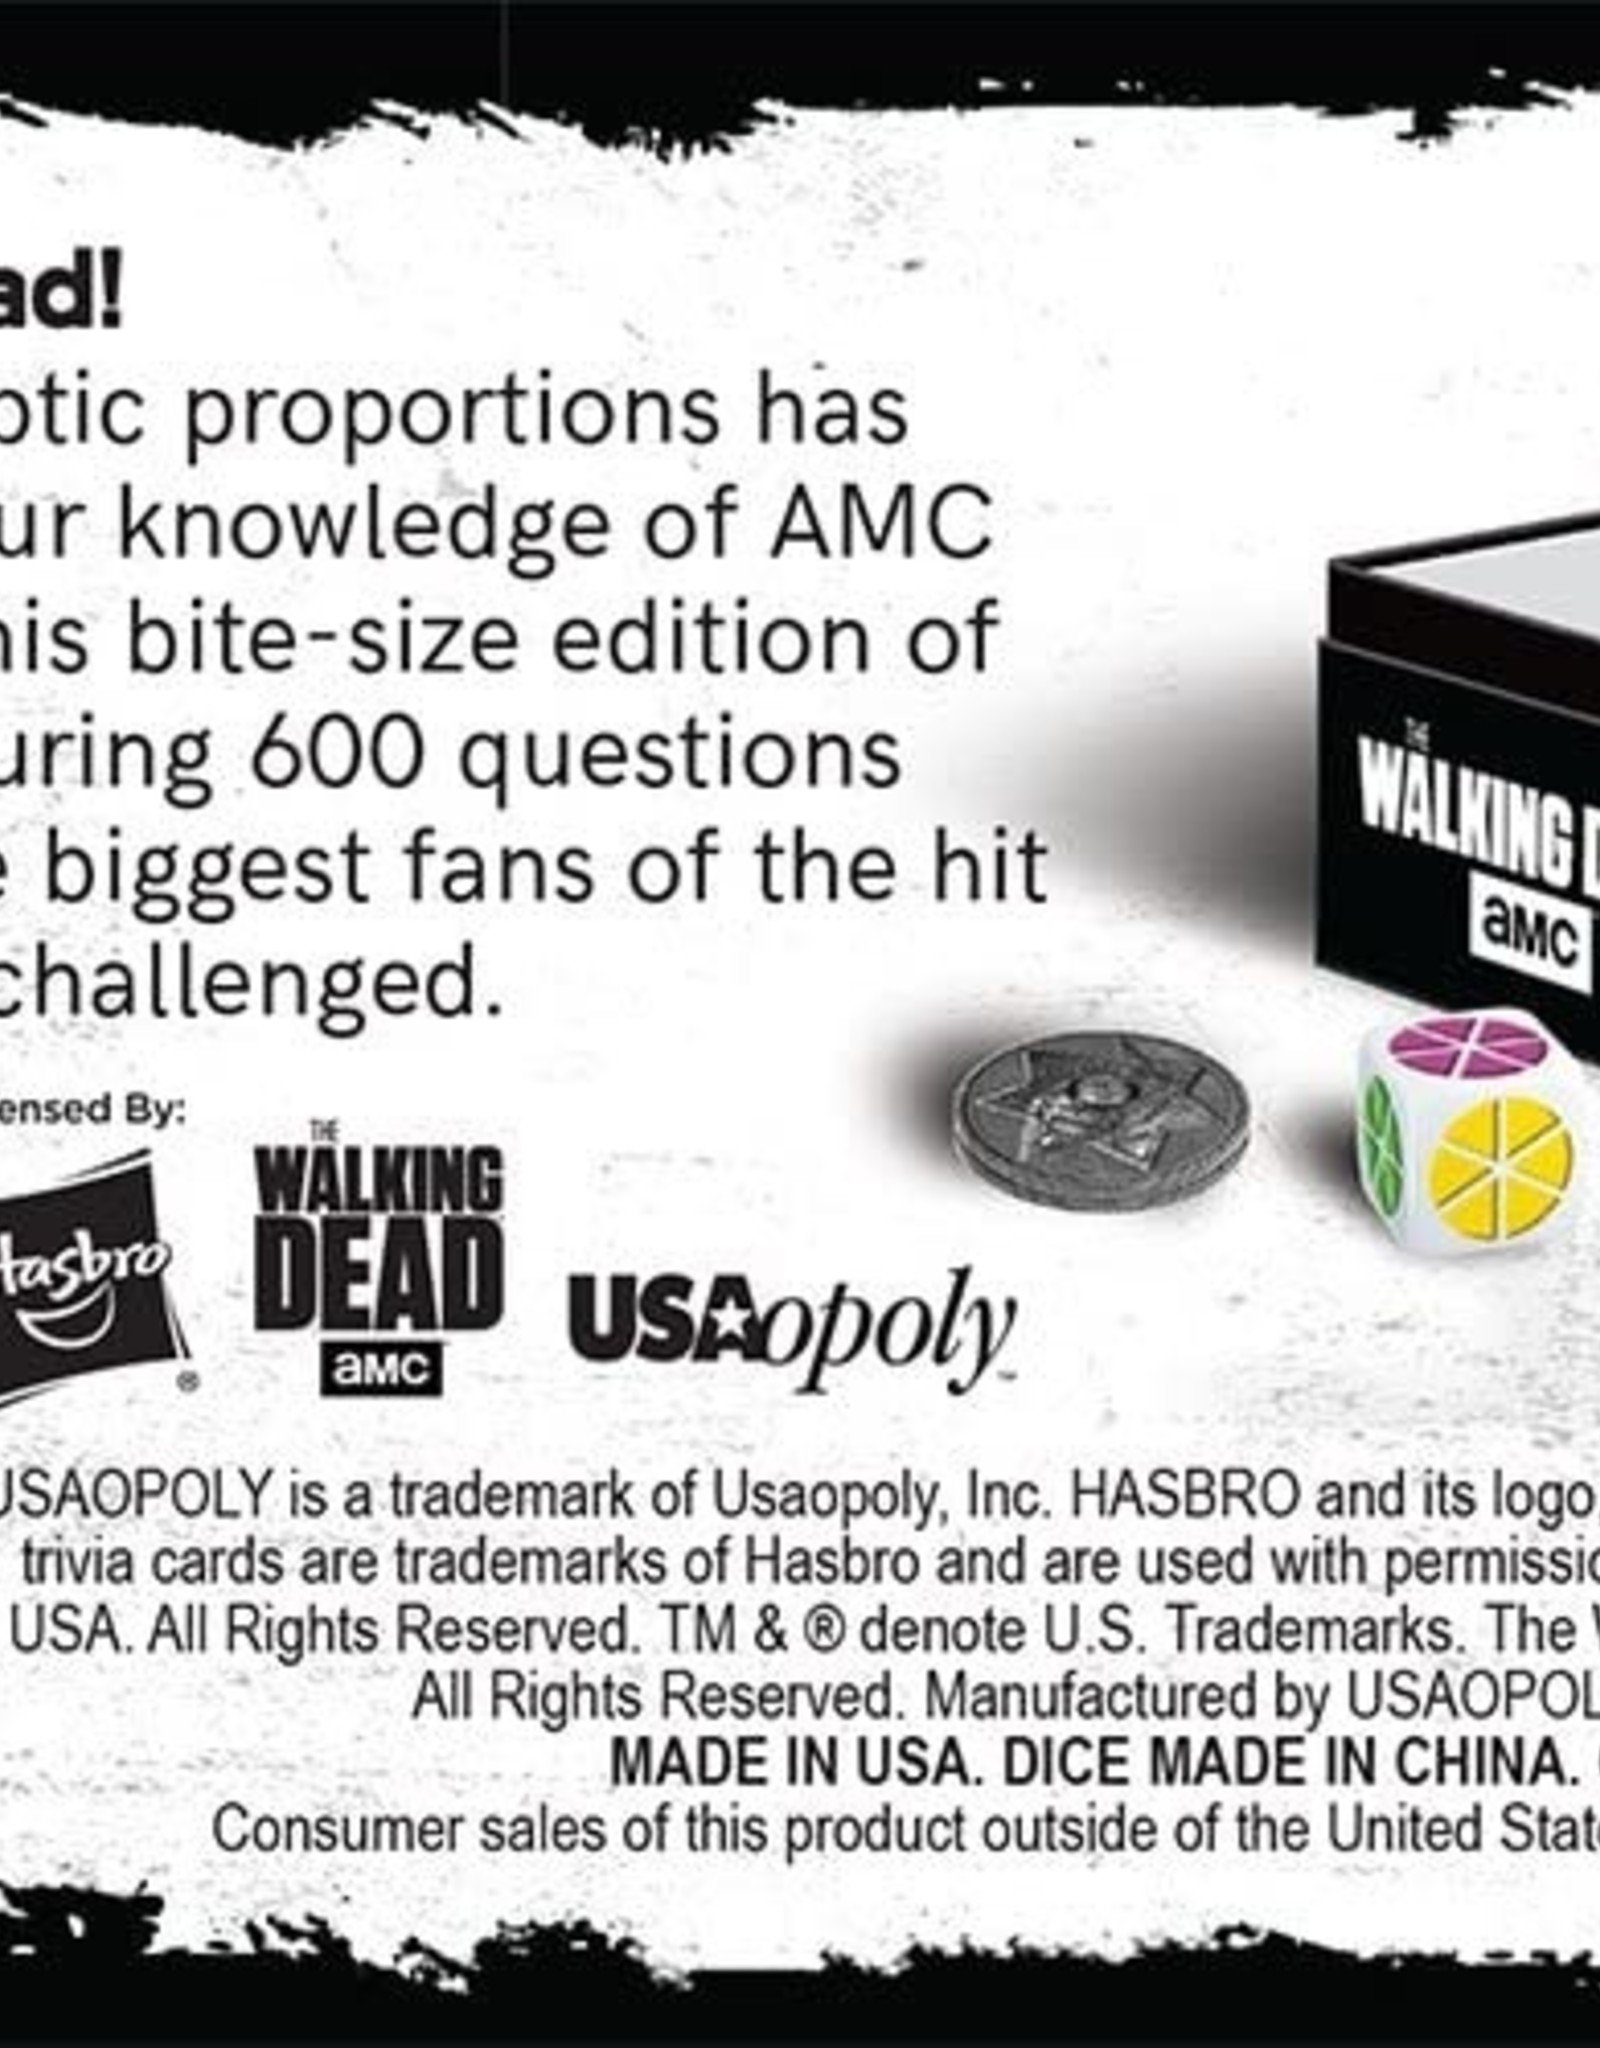 Usaopoly Trivial Pursuit: The Walking Dead